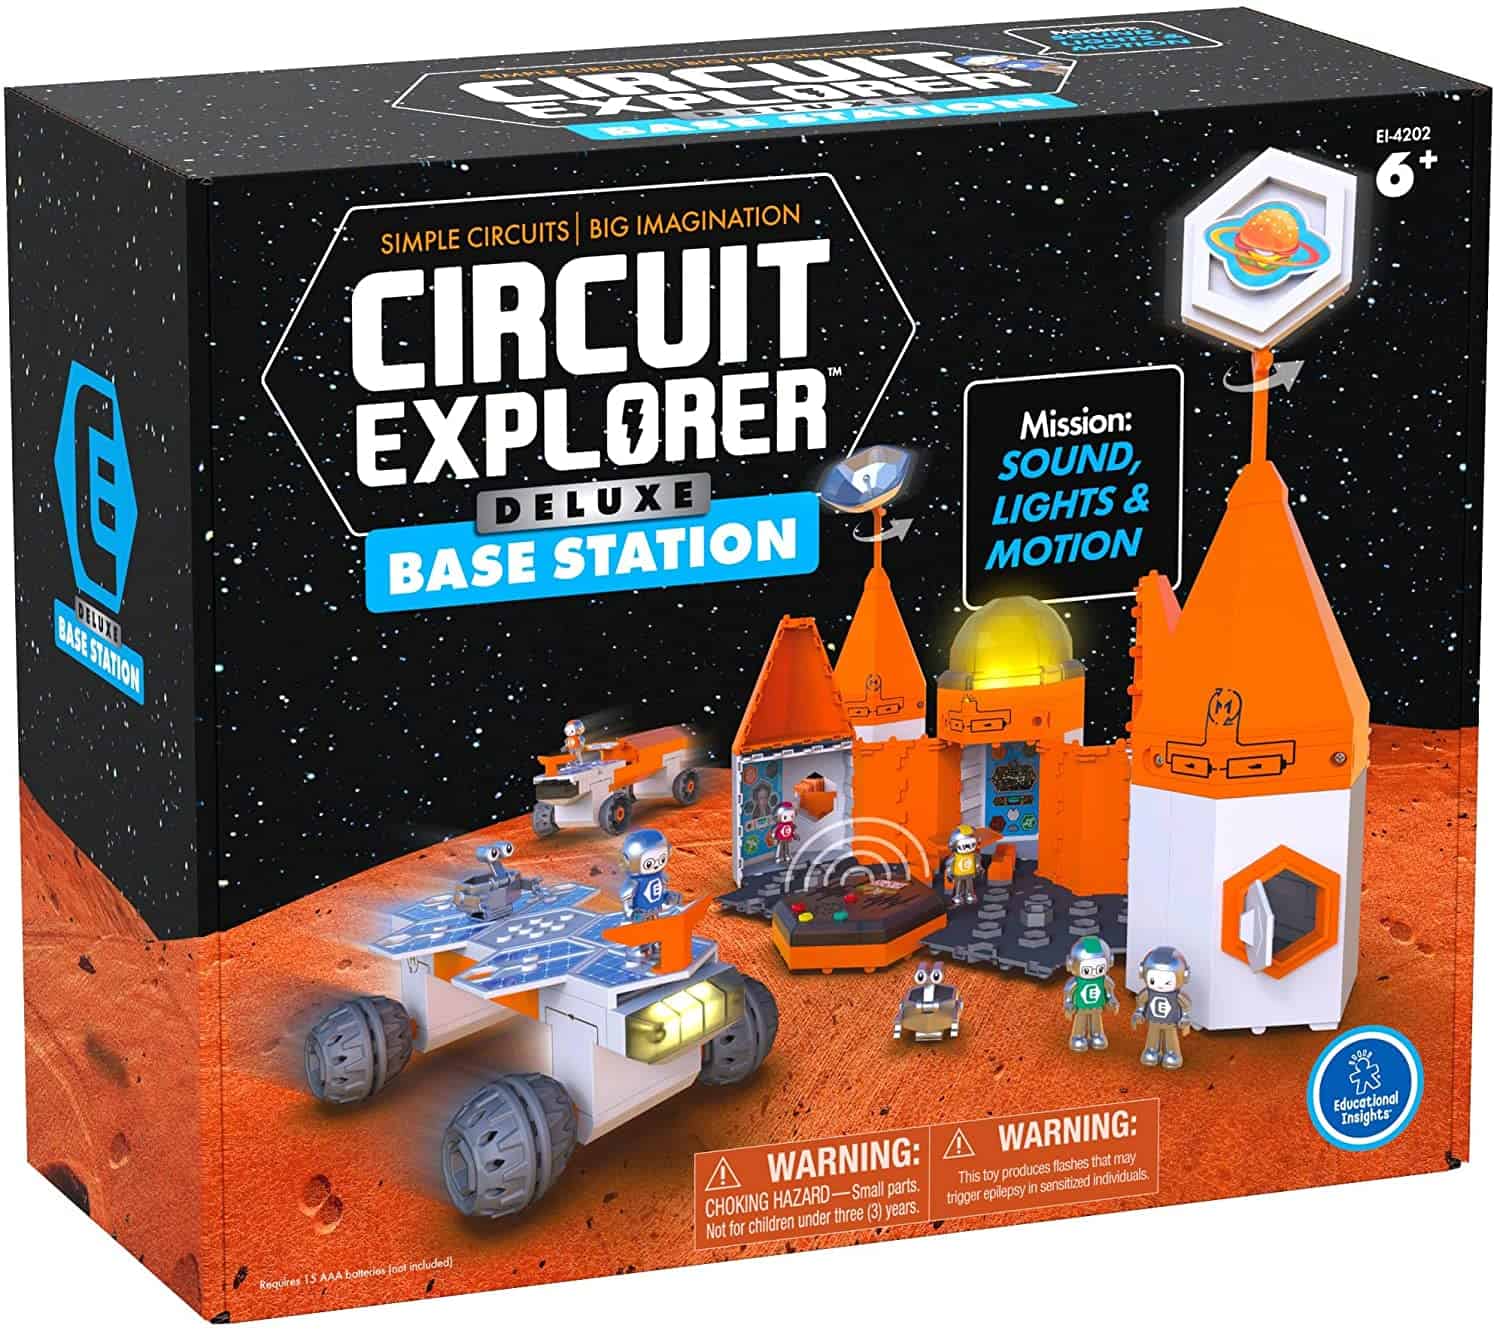 11 of the coolest STEM toys and gifts for big kids and tweens